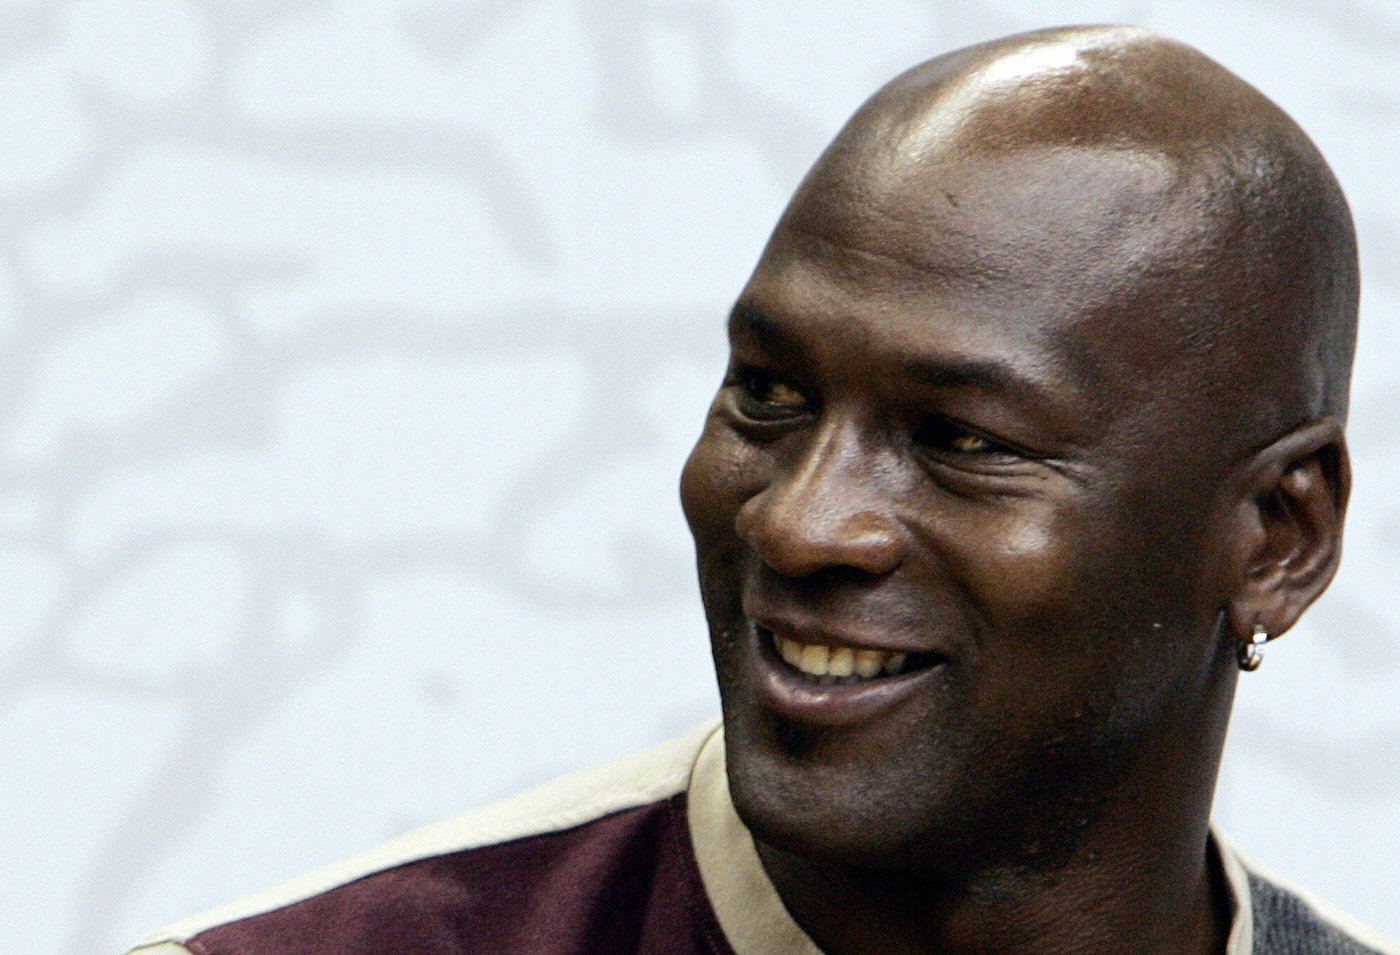 Autographed Michael Jordan memorabilia is in high demand again after 'The Last Dance'. One piece was just found in a bizarre spot.